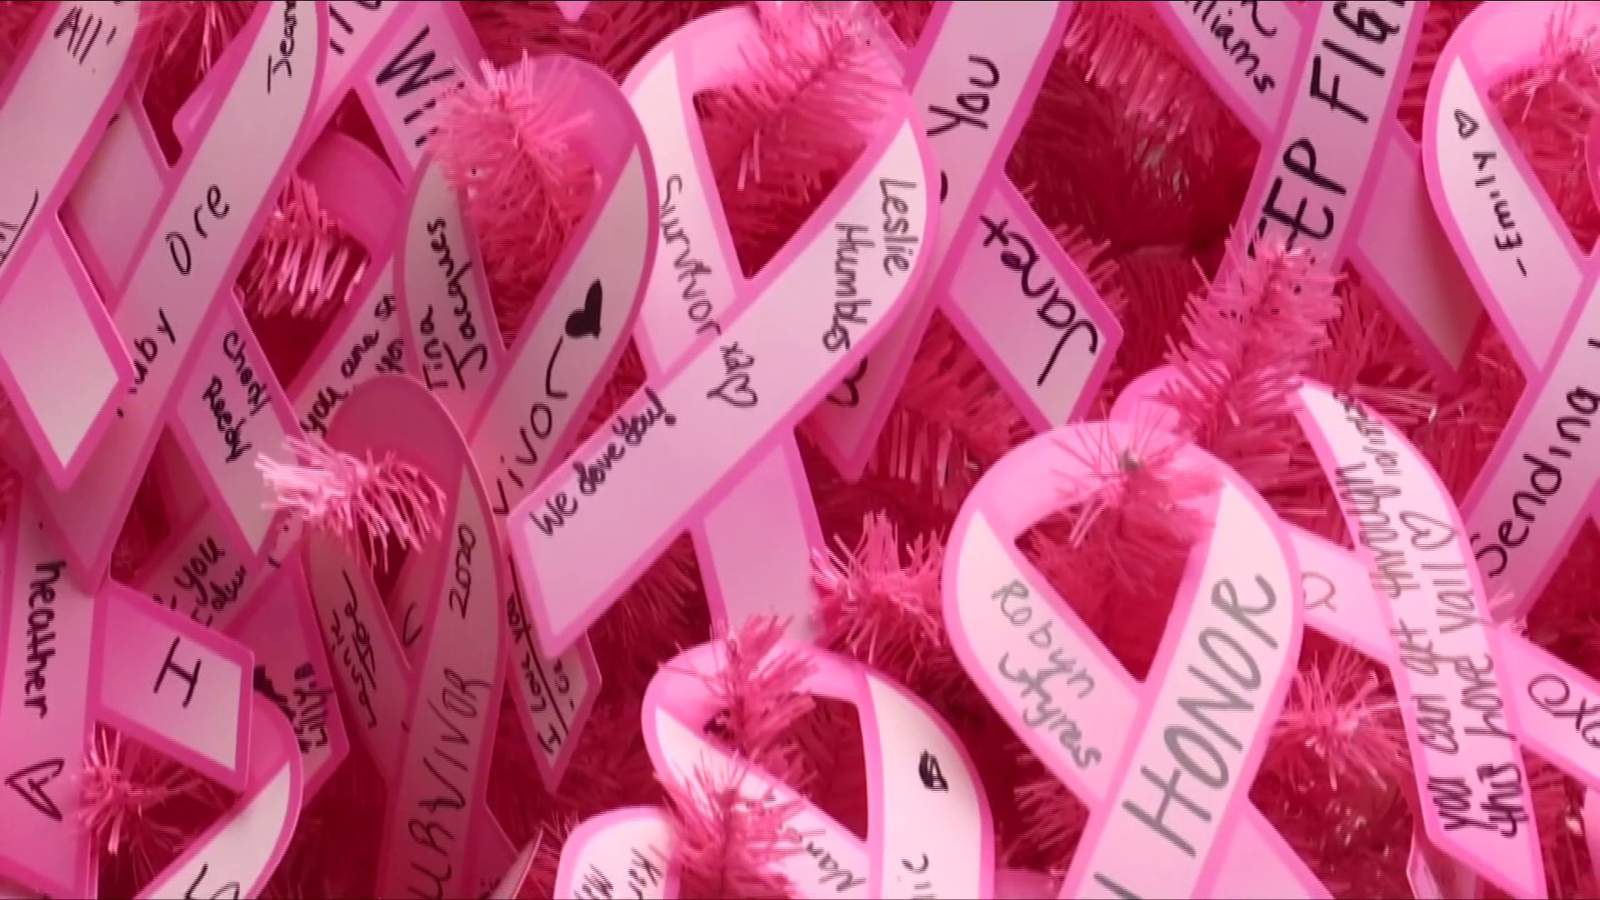 Centra, River Ridge Mall partner for ‘I Pink I Can’ fundraiser